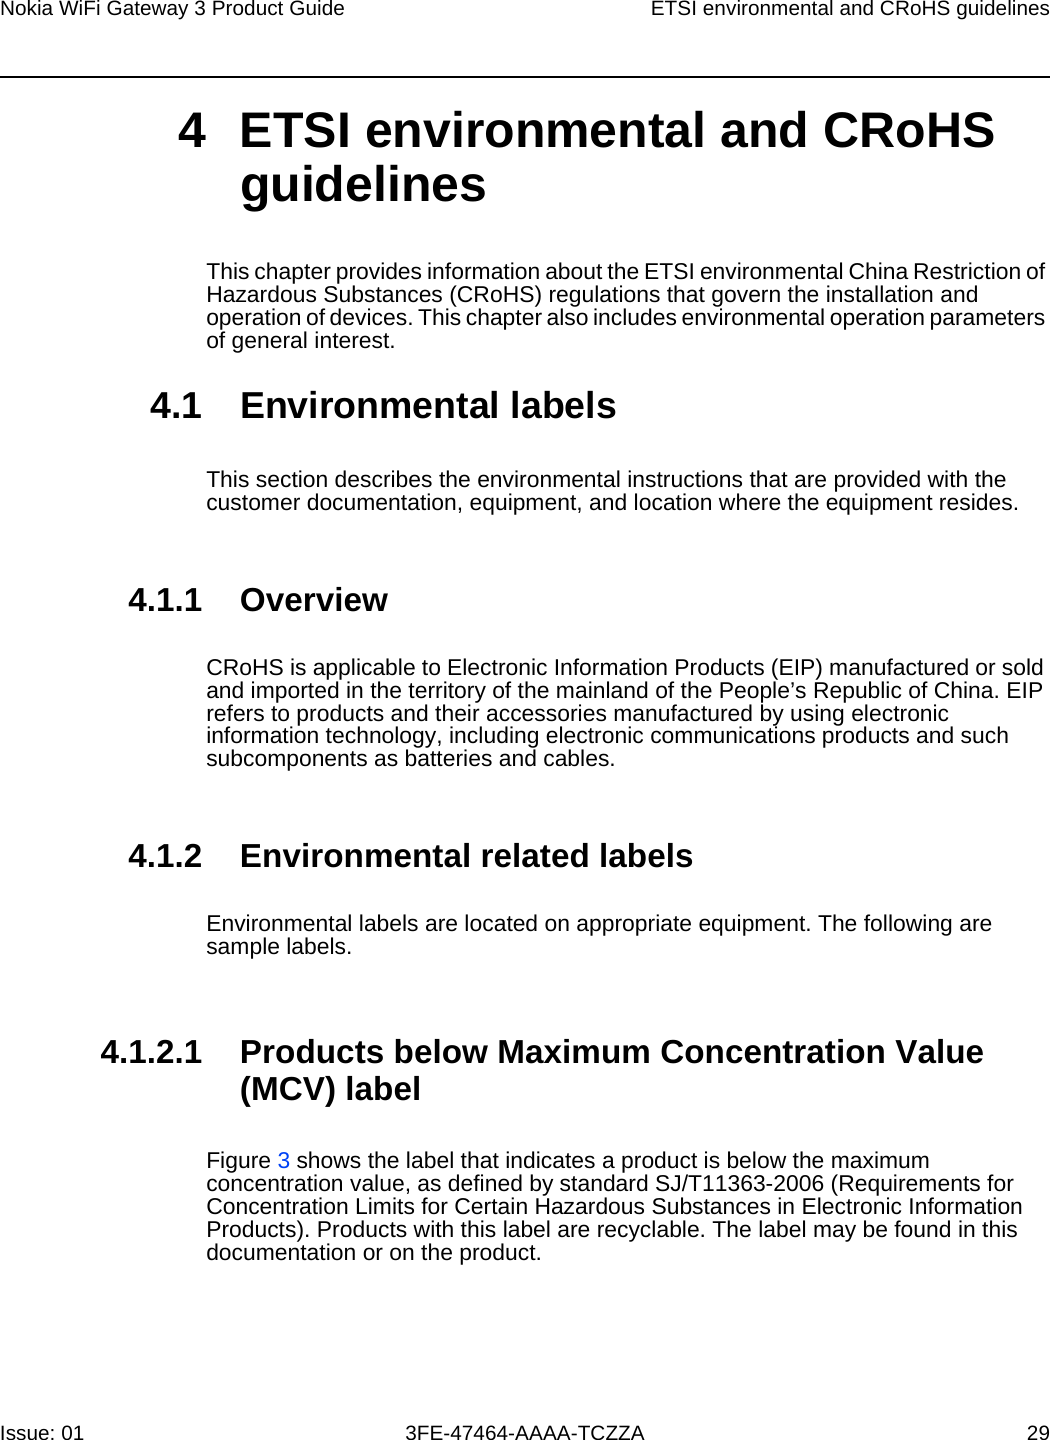 Nokia WiFi Gateway 3 Product Guide ETSI environmental and CRoHS guidelinesIssue: 01 3FE-47464-AAAA-TCZZA 29 4 ETSI environmental and CRoHS guidelinesThis chapter provides information about the ETSI environmental China Restriction of Hazardous Substances (CRoHS) regulations that govern the installation and operation of devices. This chapter also includes environmental operation parameters of general interest.4.1 Environmental labelsThis section describes the environmental instructions that are provided with the customer documentation, equipment, and location where the equipment resides.4.1.1 OverviewCRoHS is applicable to Electronic Information Products (EIP) manufactured or sold and imported in the territory of the mainland of the People’s Republic of China. EIP refers to products and their accessories manufactured by using electronic information technology, including electronic communications products and such subcomponents as batteries and cables.4.1.2 Environmental related labelsEnvironmental labels are located on appropriate equipment. The following are sample labels.4.1.2.1 Products below Maximum Concentration Value (MCV) labelFigure 3 shows the label that indicates a product is below the maximum concentration value, as defined by standard SJ/T11363-2006 (Requirements for Concentration Limits for Certain Hazardous Substances in Electronic Information Products). Products with this label are recyclable. The label may be found in this documentation or on the product.